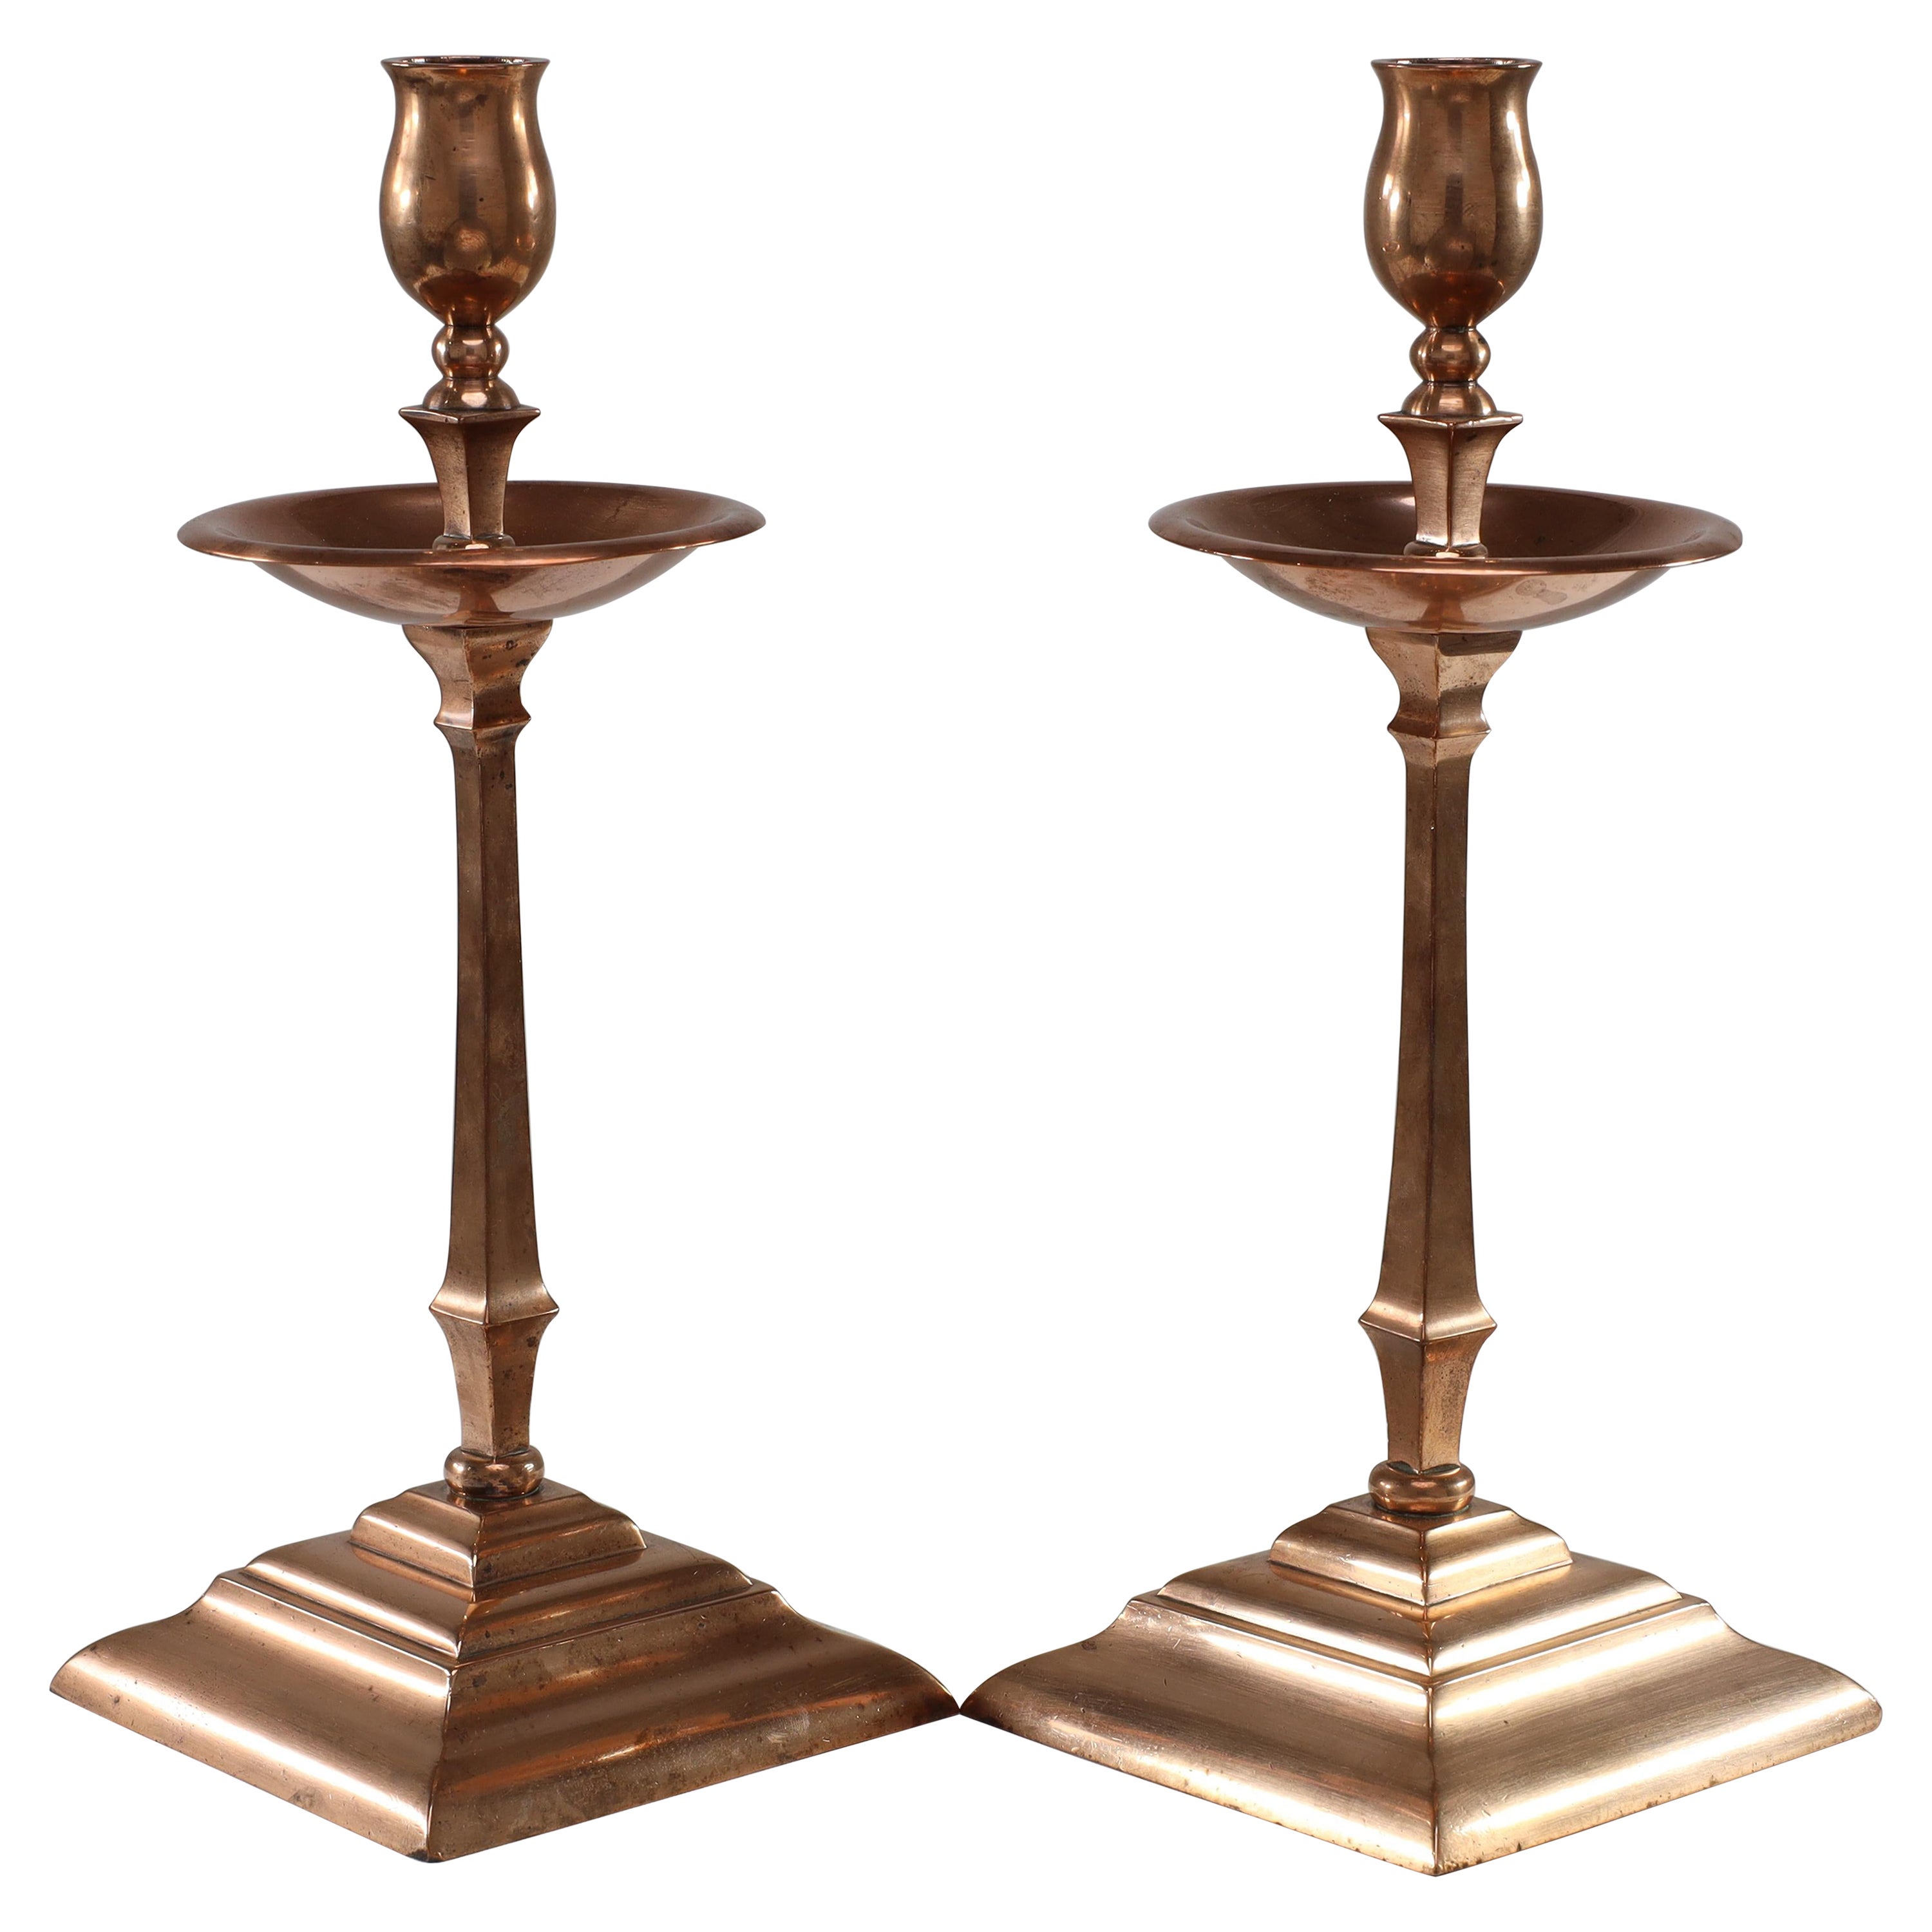 WAS Benson. A pair of Arts and Crafts copper and brass candlesticks. For Sale